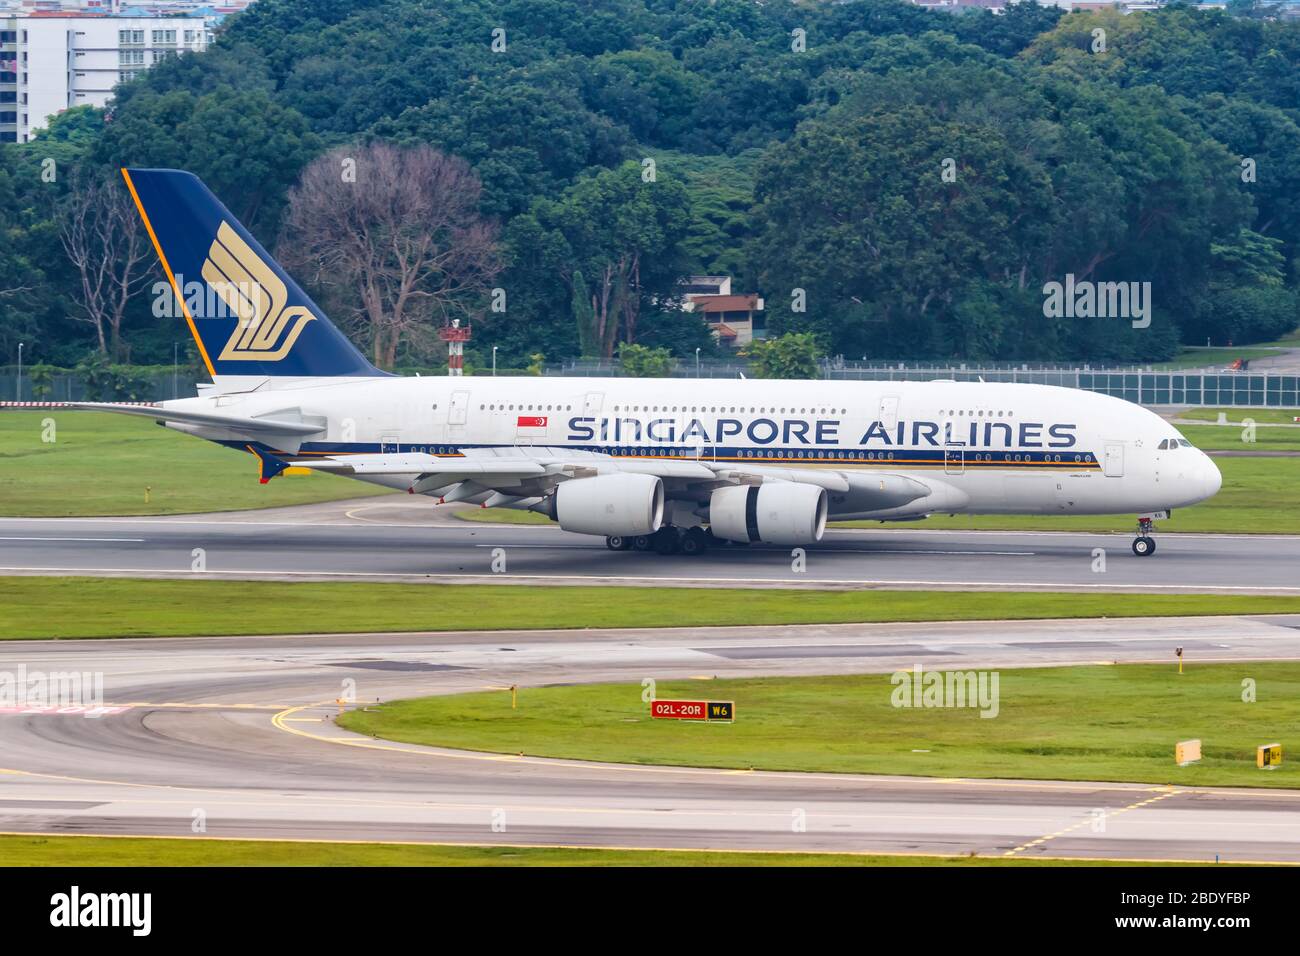 Changi, Singapore – January 29, 2018: Singapore Airlines Airbus A380 airplane at Changi airport (SIN) in Singapore. Airbus is a European aircraft manu Stock Photo